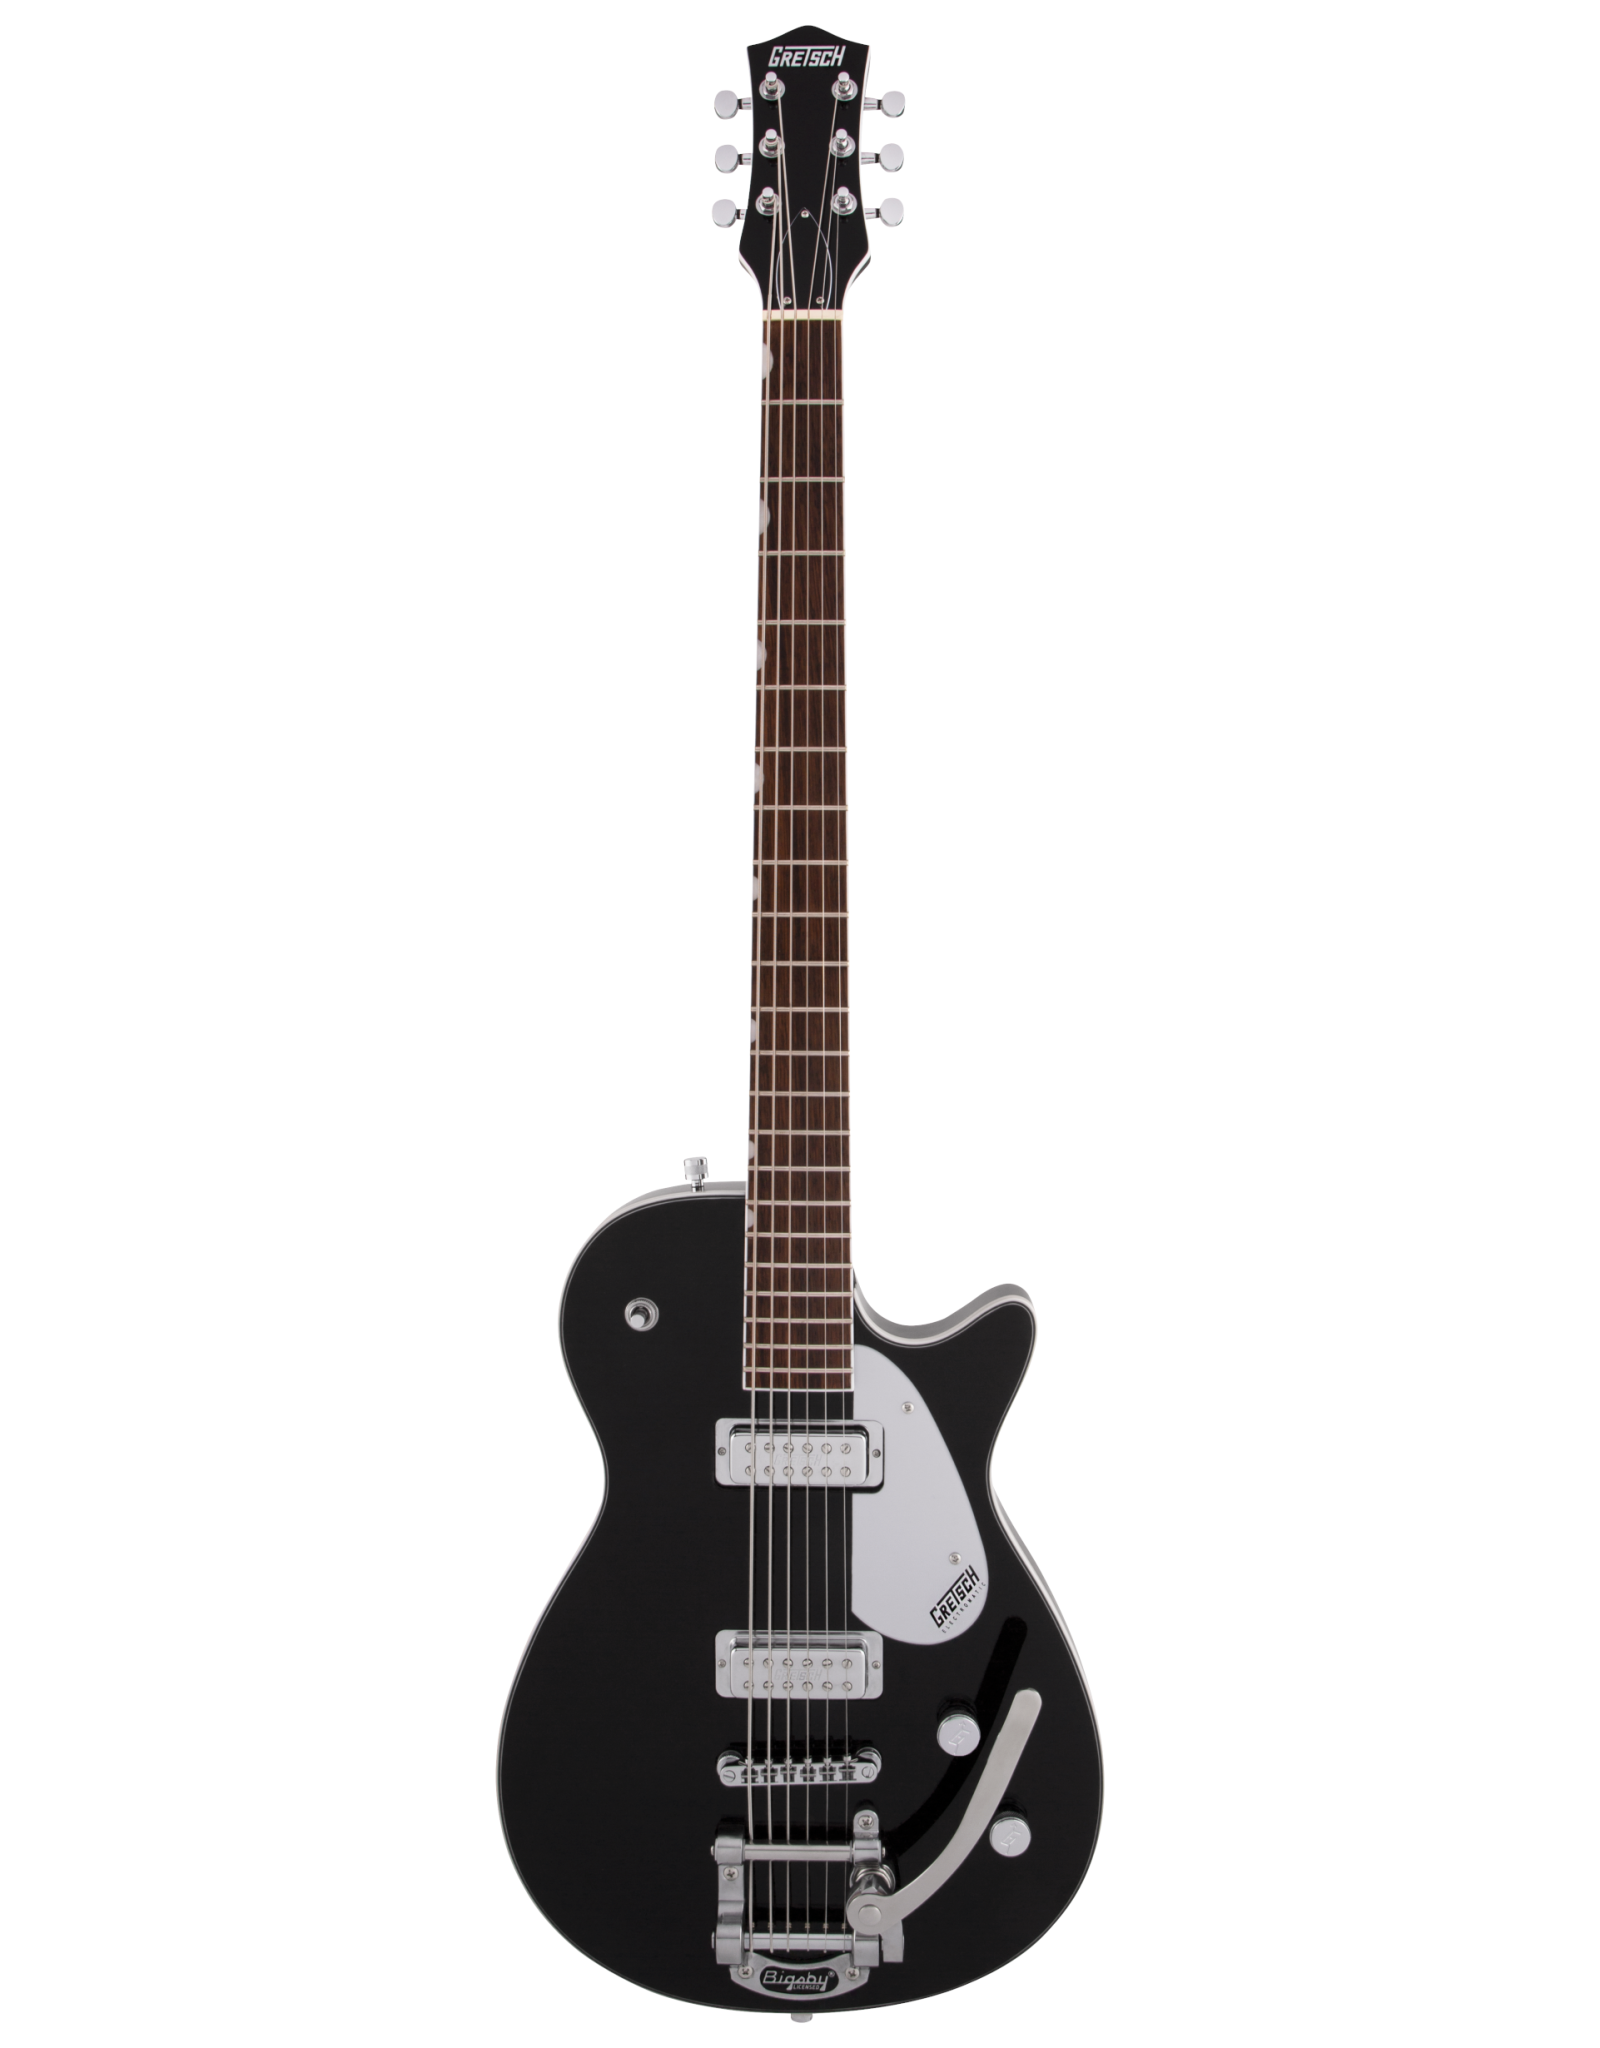 Gretsch Gretsch G5260T Electromatic Jet Baritone with Bigsby, Black